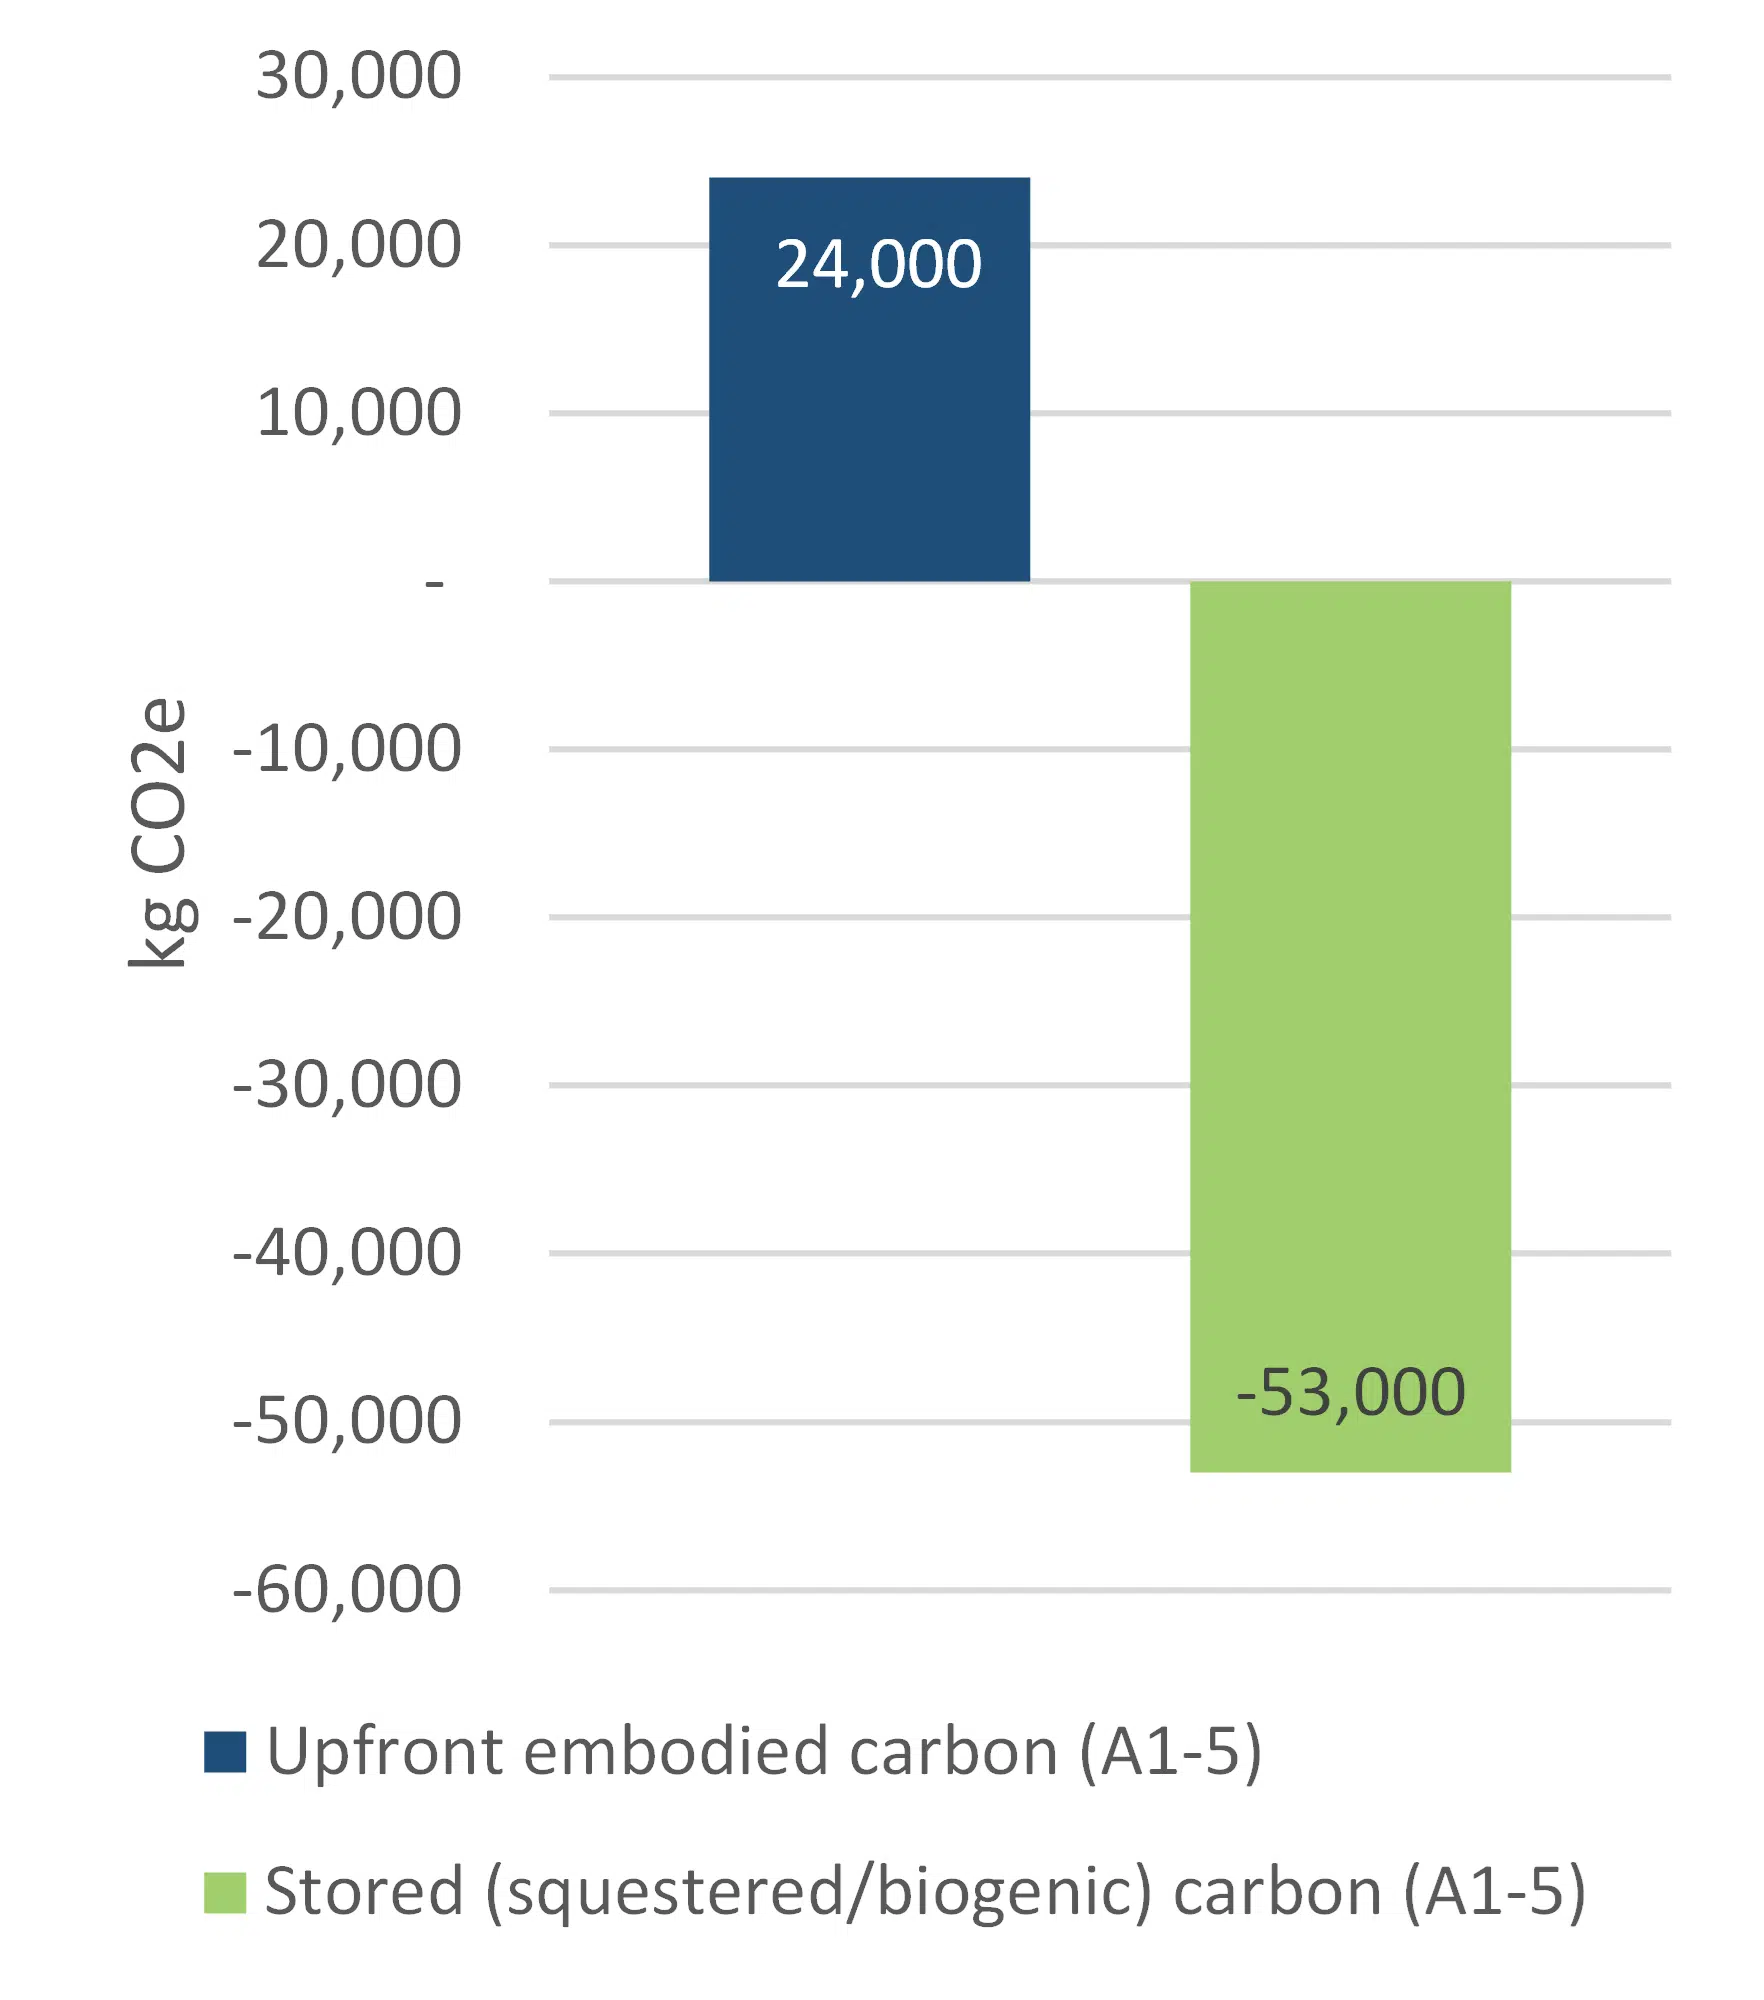 Bar chart of upfront embodied carbon vs stored carbon